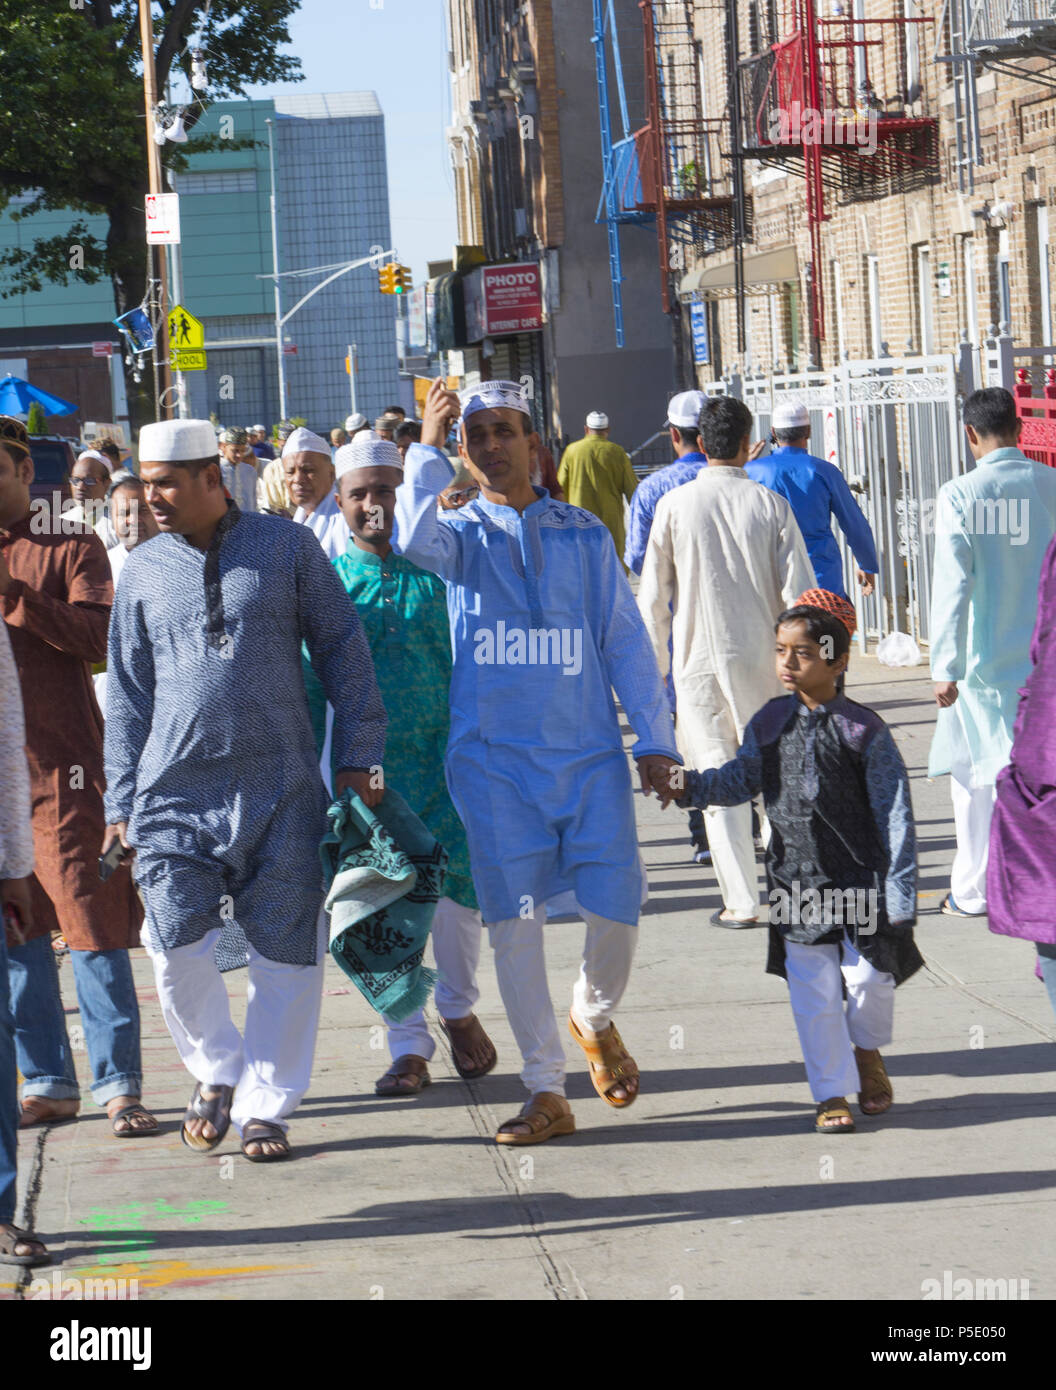 Muslim men pray on Eid on McDonald Ave in Brooklyn NY in the 'Little Bangladesh' Kensington neighborhood.  Eid al-Fitr 'feast of breaking of the fast') is an important religious holiday celebrated by Muslims worldwide that marks the end of Ramadan, the Islamic holy month of fasting (sawm). Stock Photo